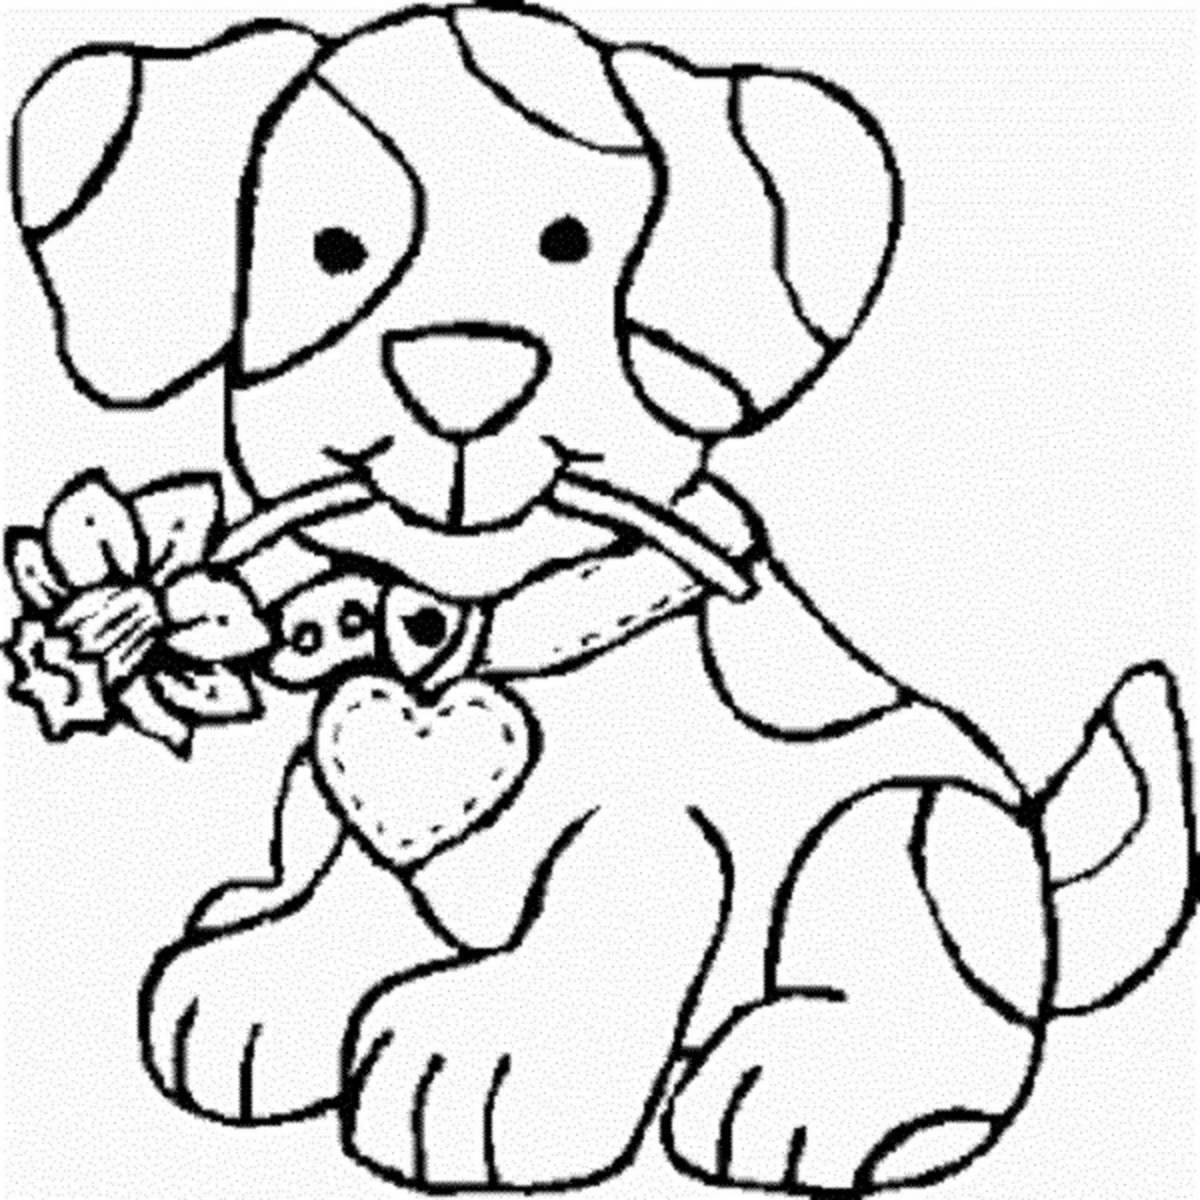 Joyful dog coloring book for children 2-3 years old